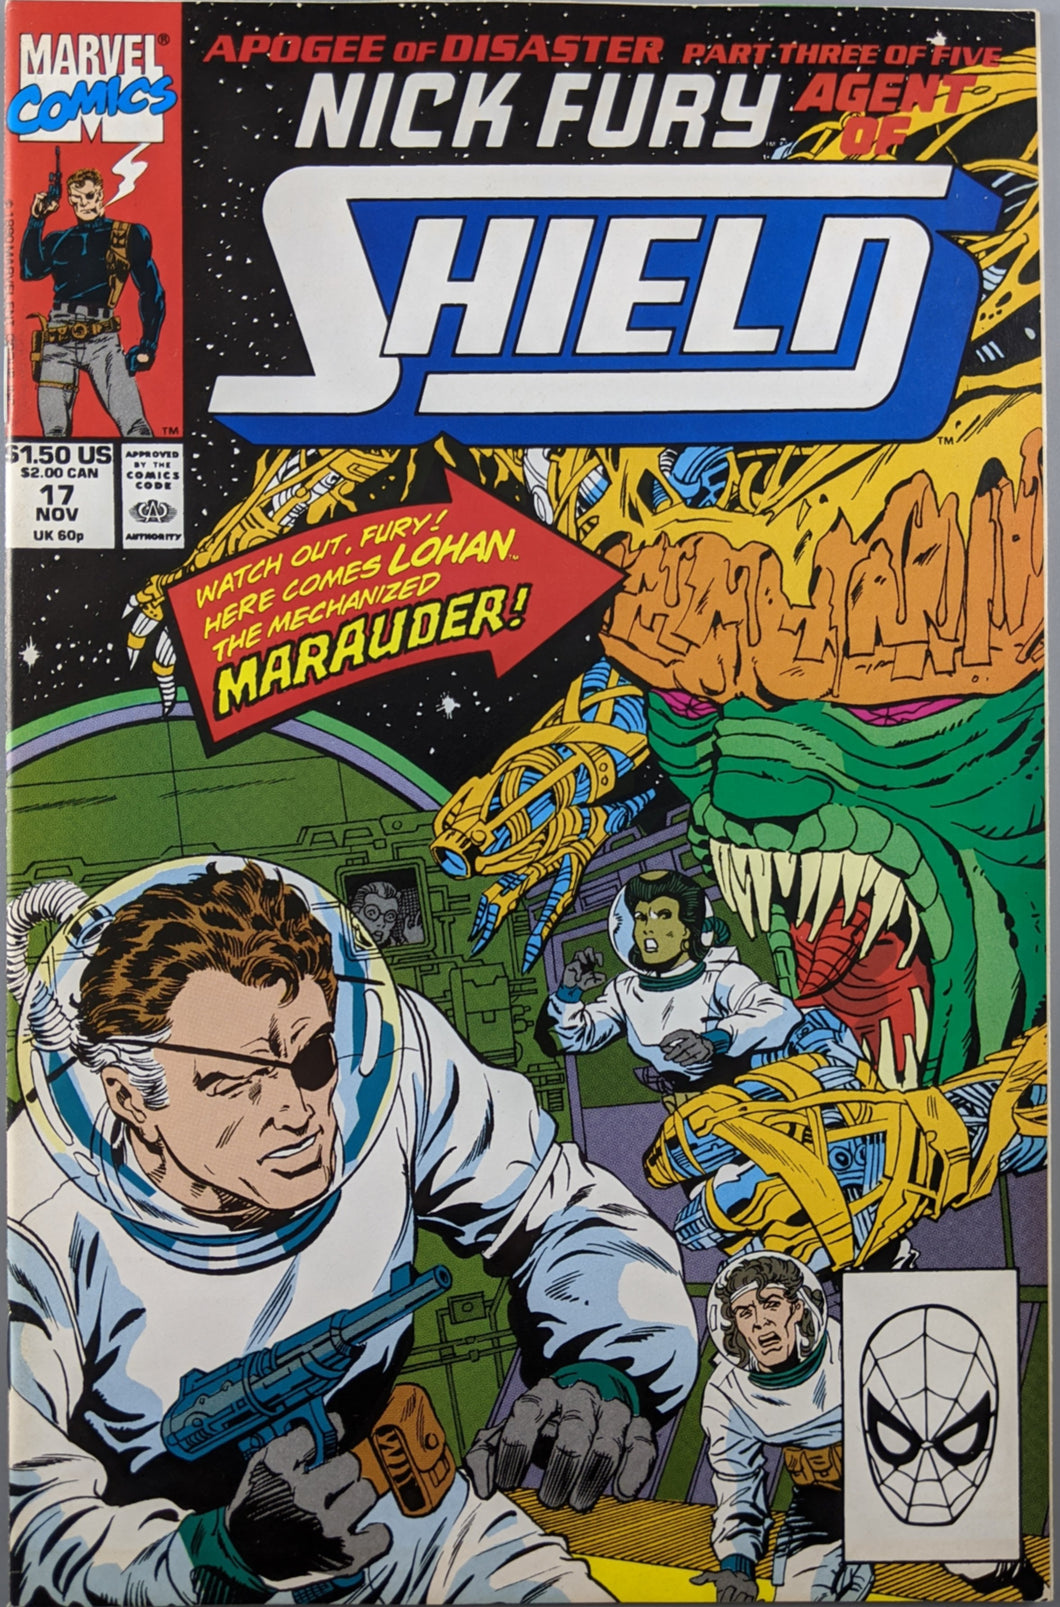 Nick Fury Agent of SHIELD #17 Comic Book Cover Art